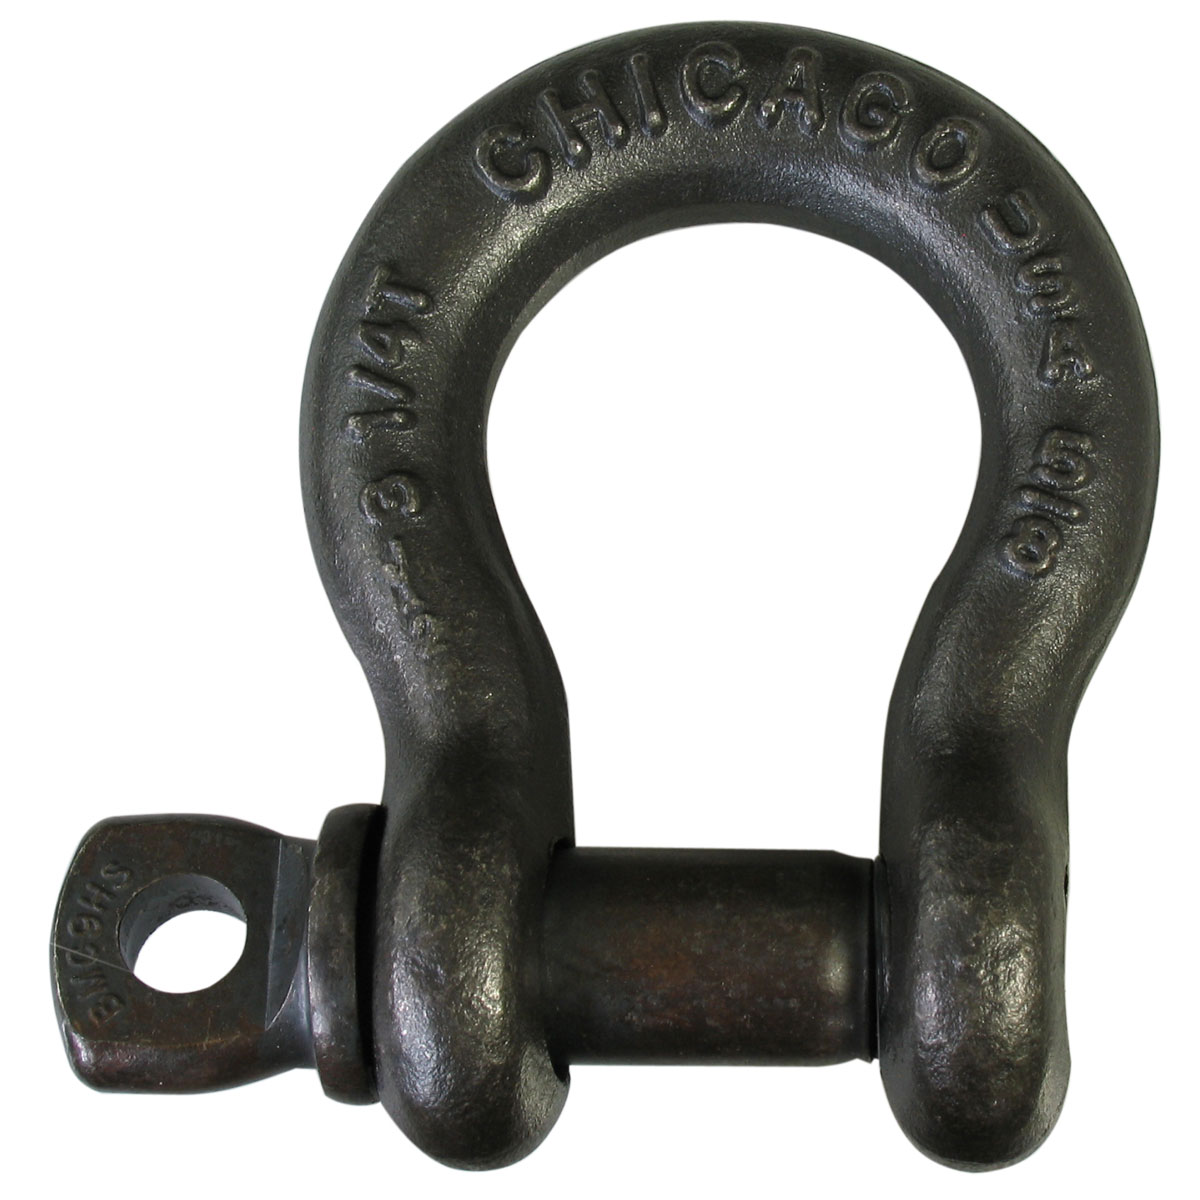 Chicago Hardware Black Theatrical Anchor Shackle